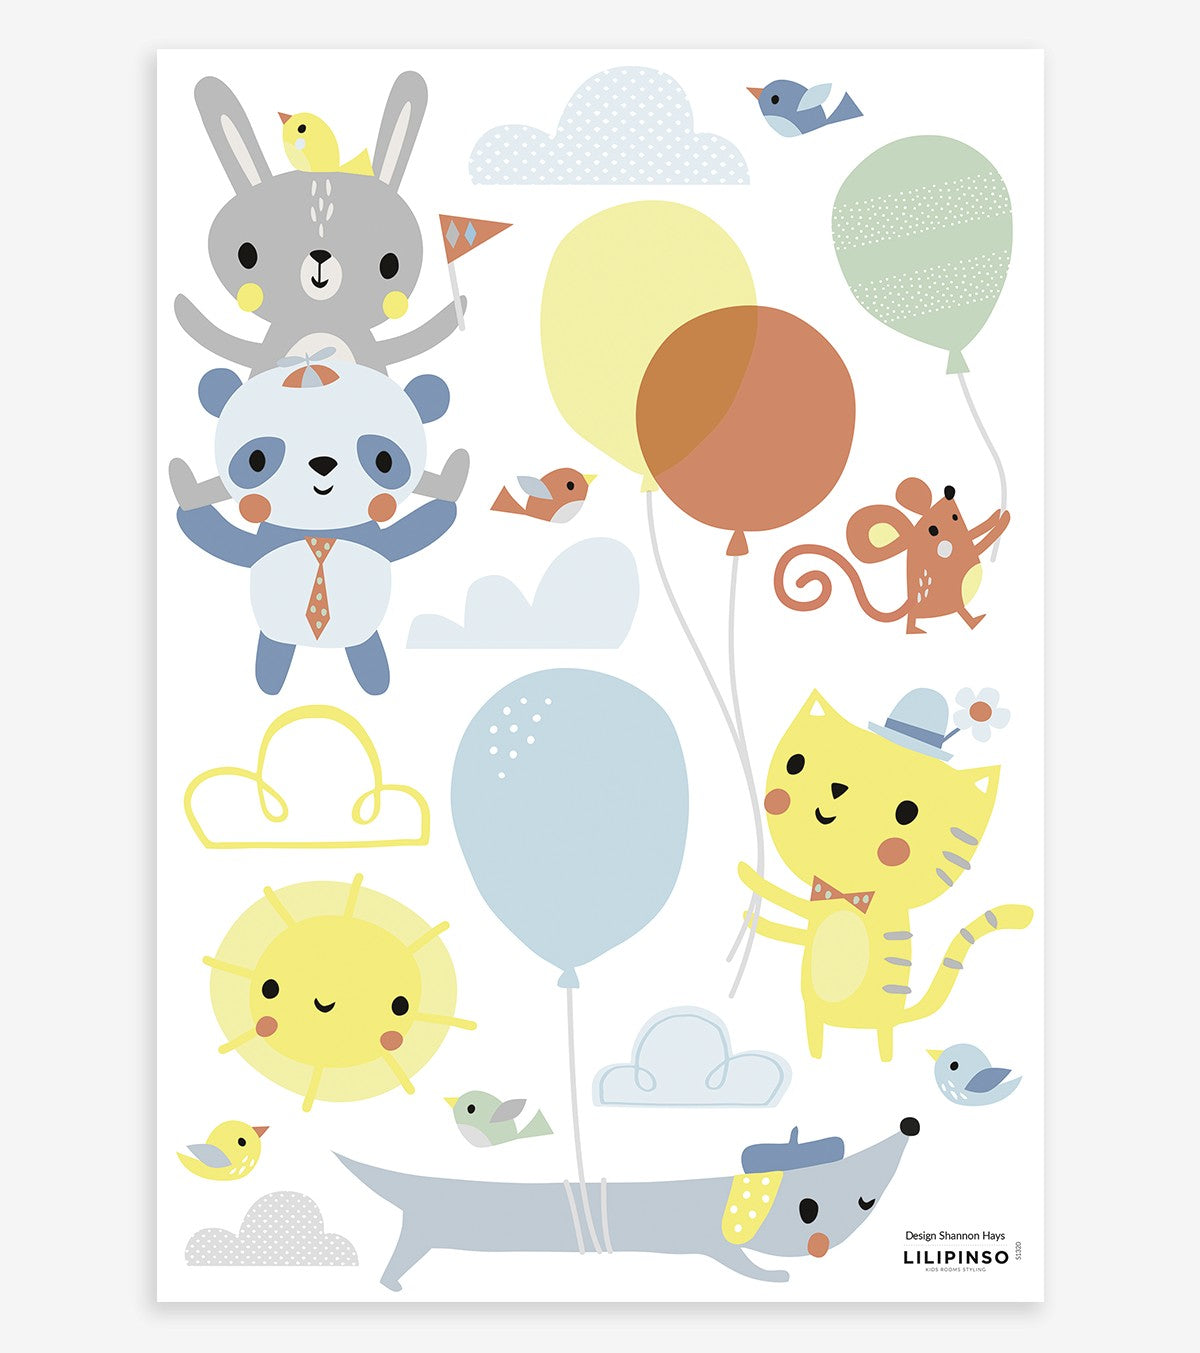 UP! - Wall decals murals - Animals and balloons